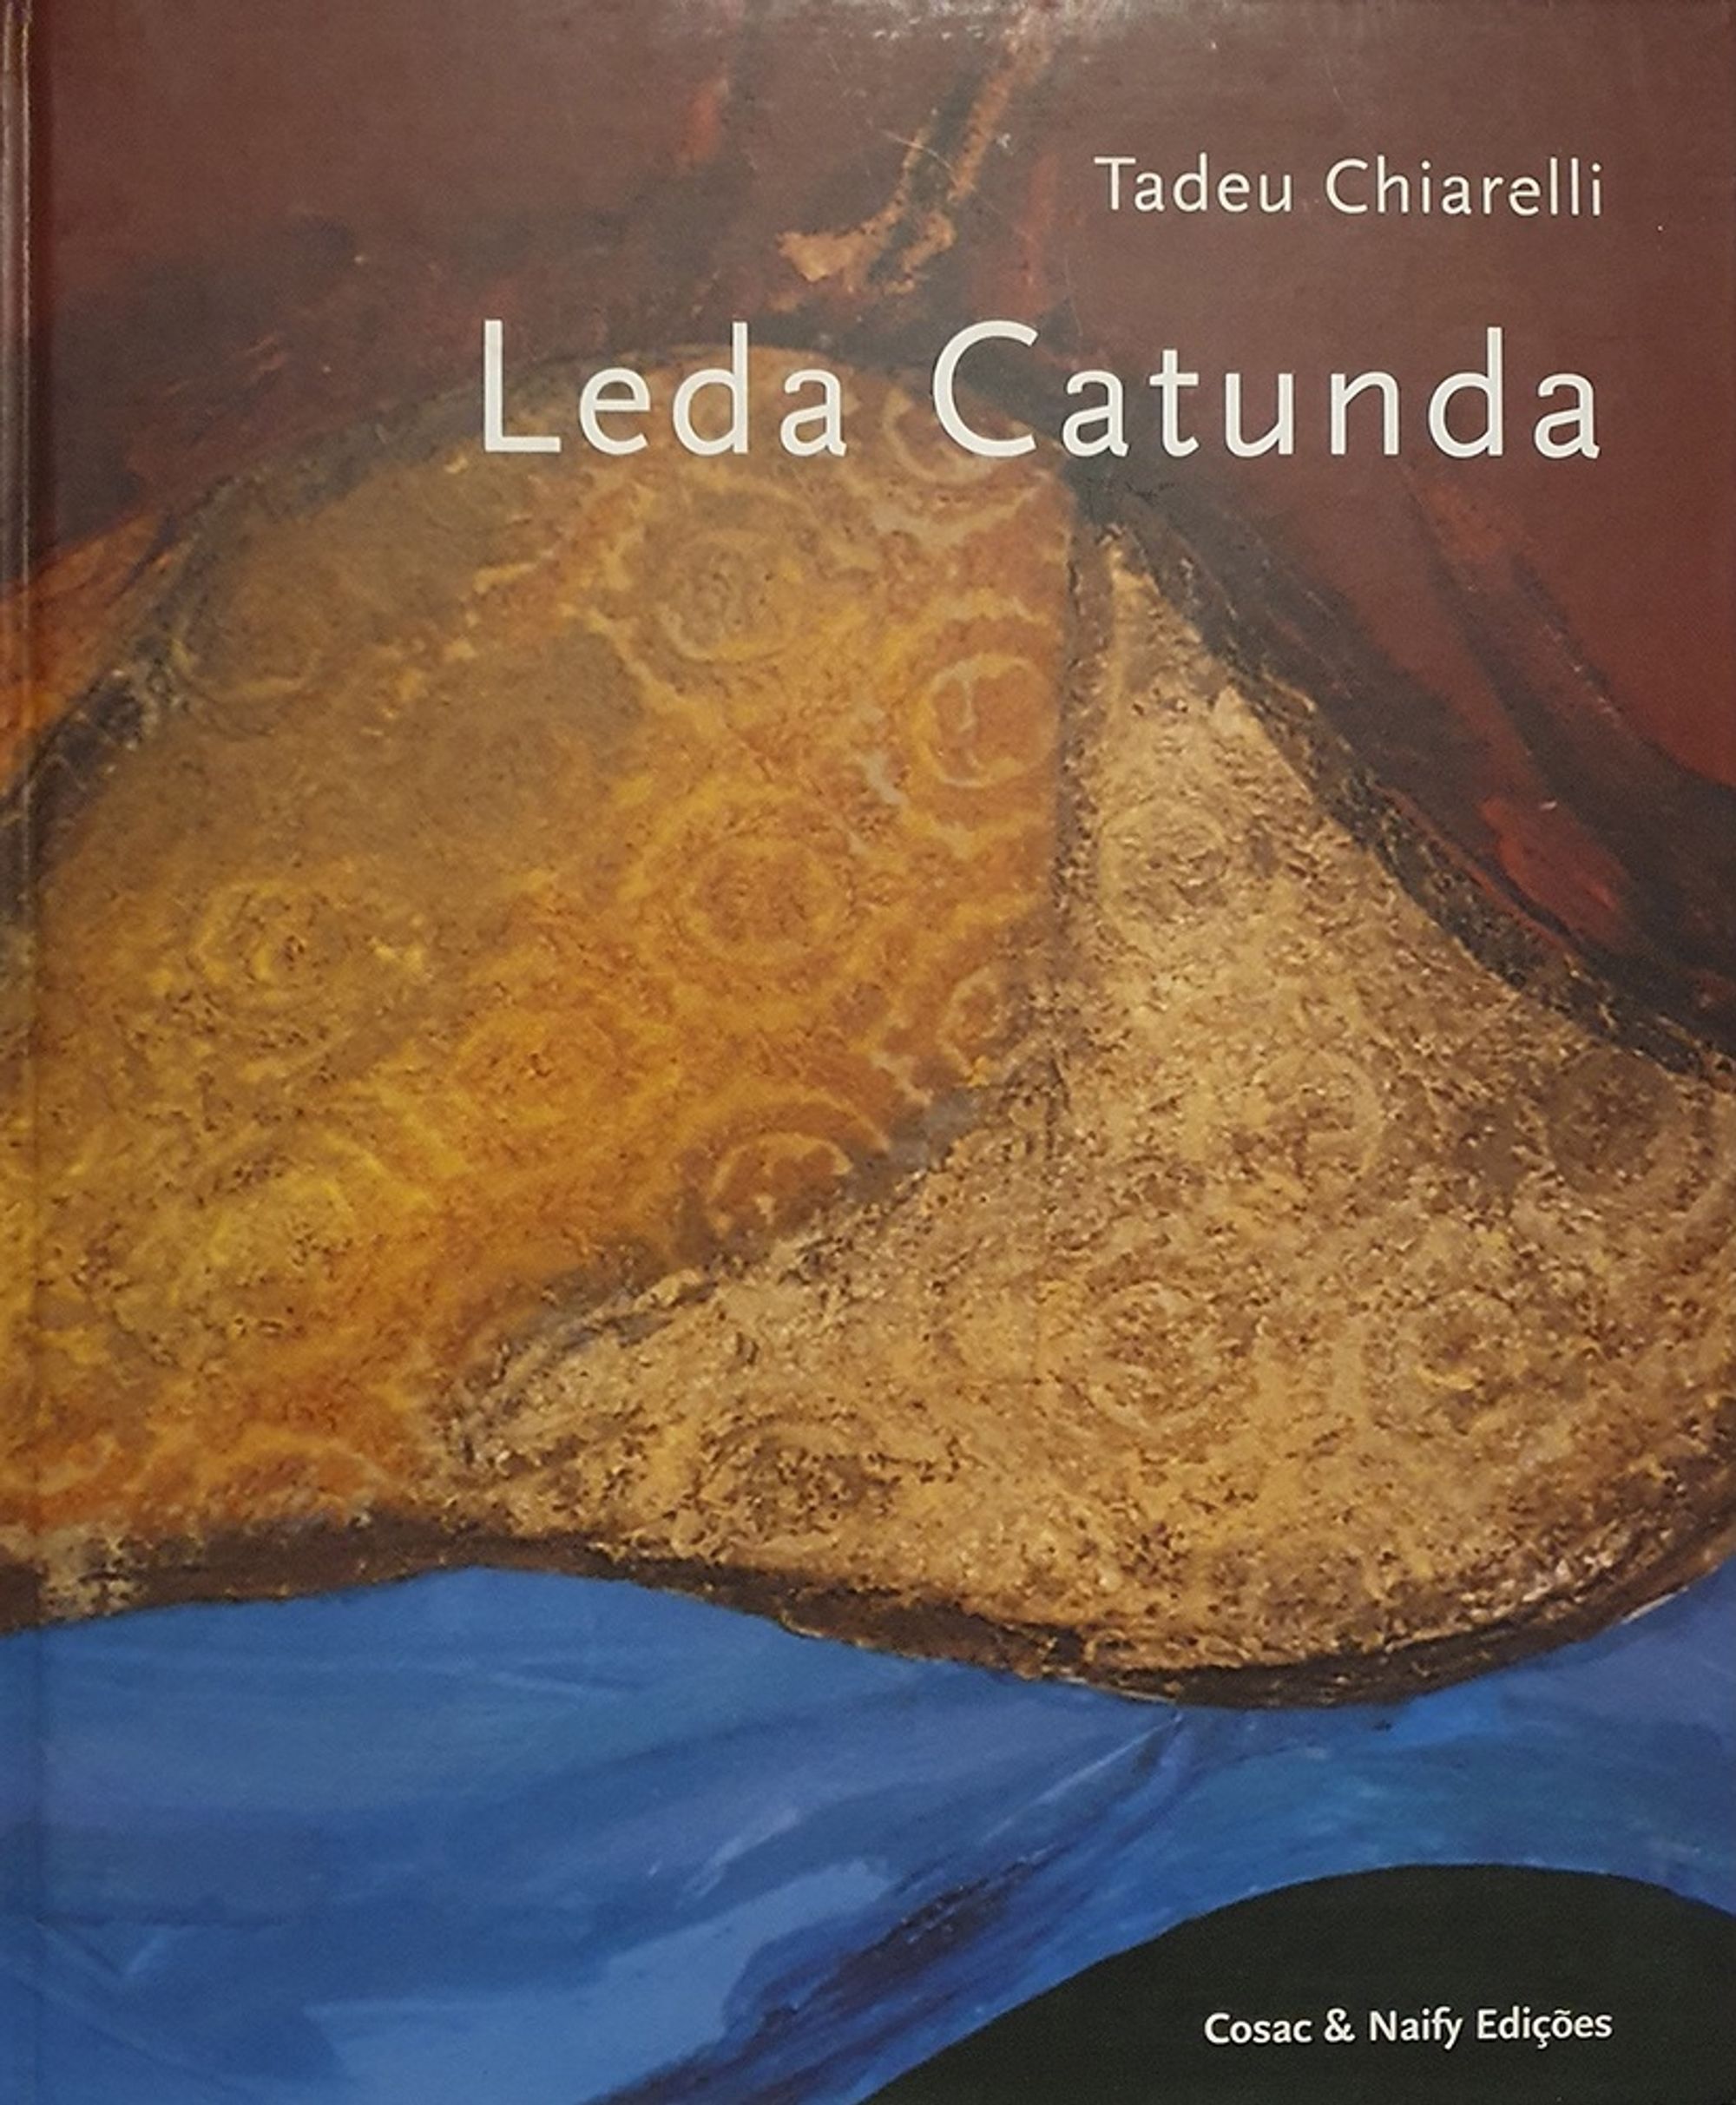 Detail view of Leda Catunda against a plain gray background